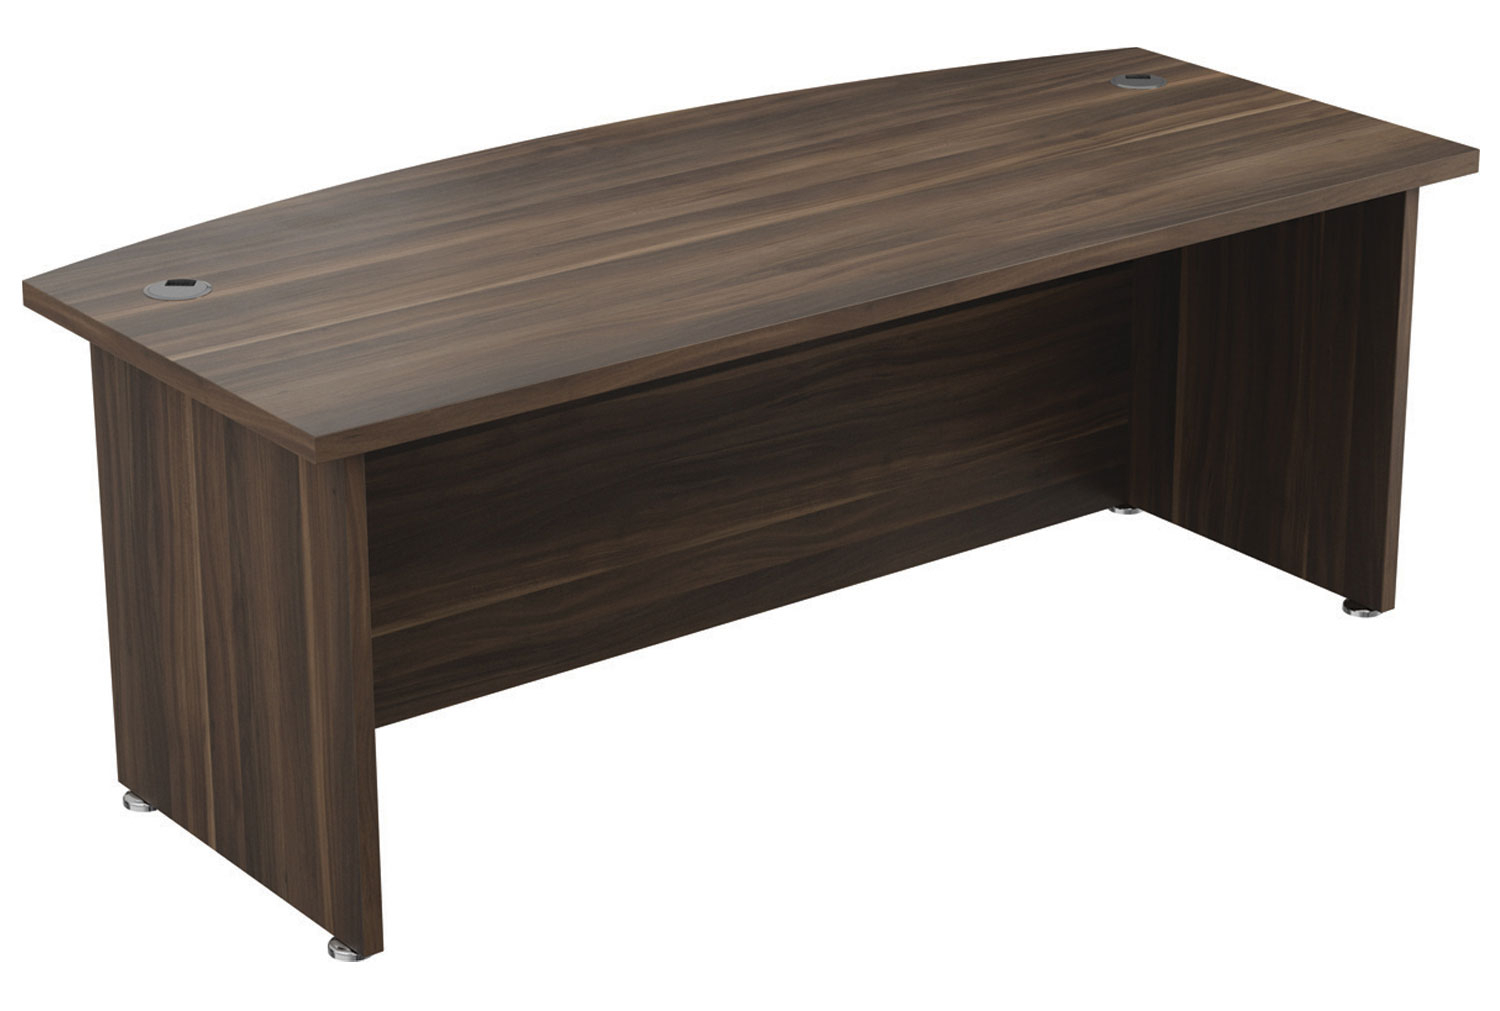 Viceroy Executive Bow Fronted Office Desk, Oak